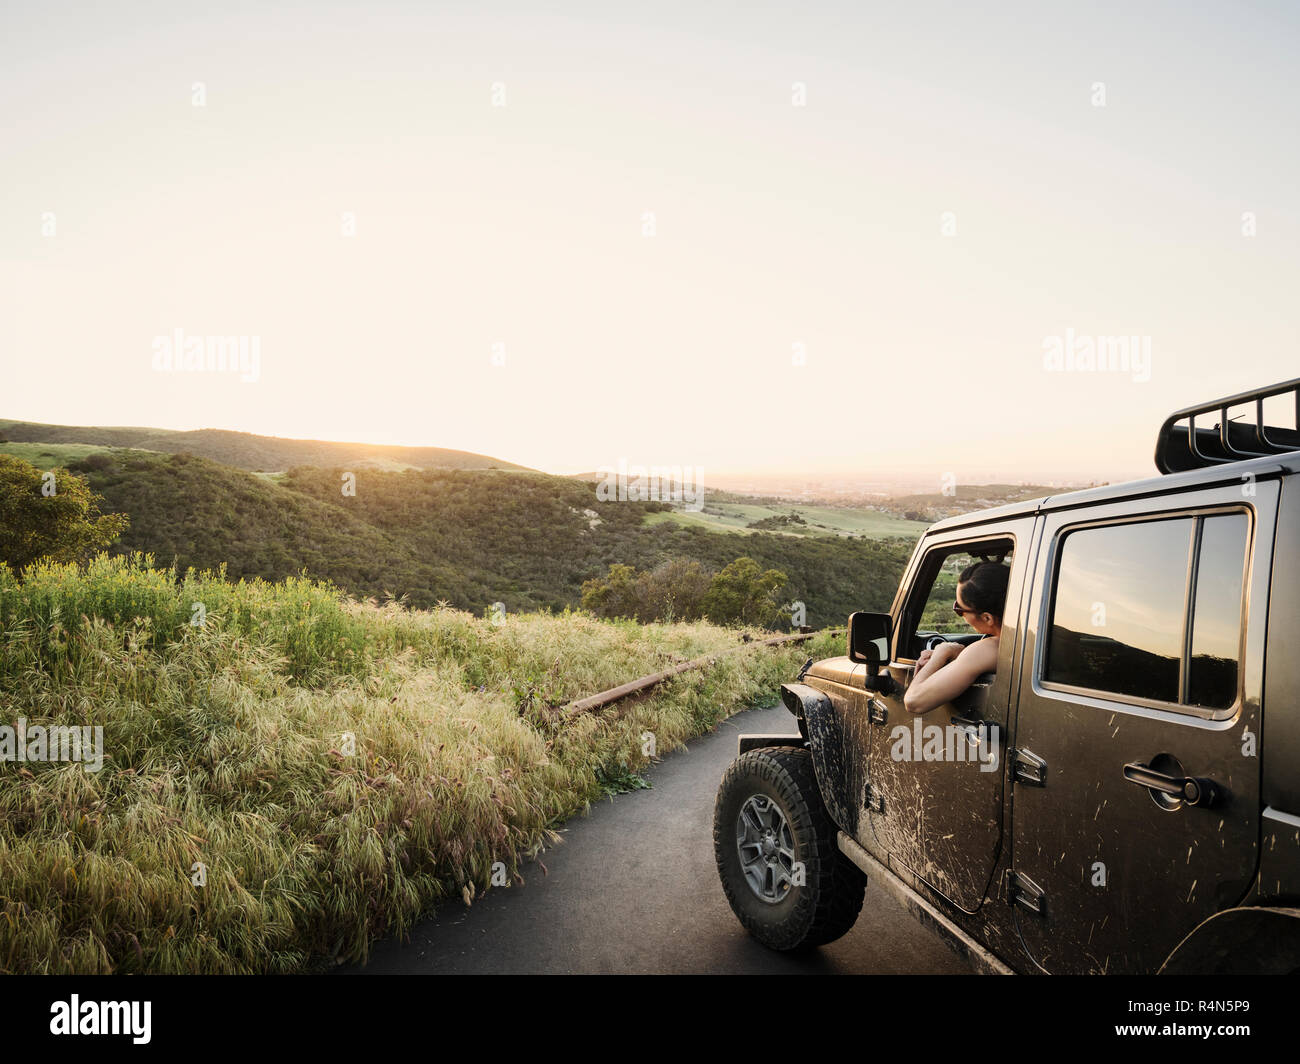 Woman in off road vehicle looking at sunset Stock Photo